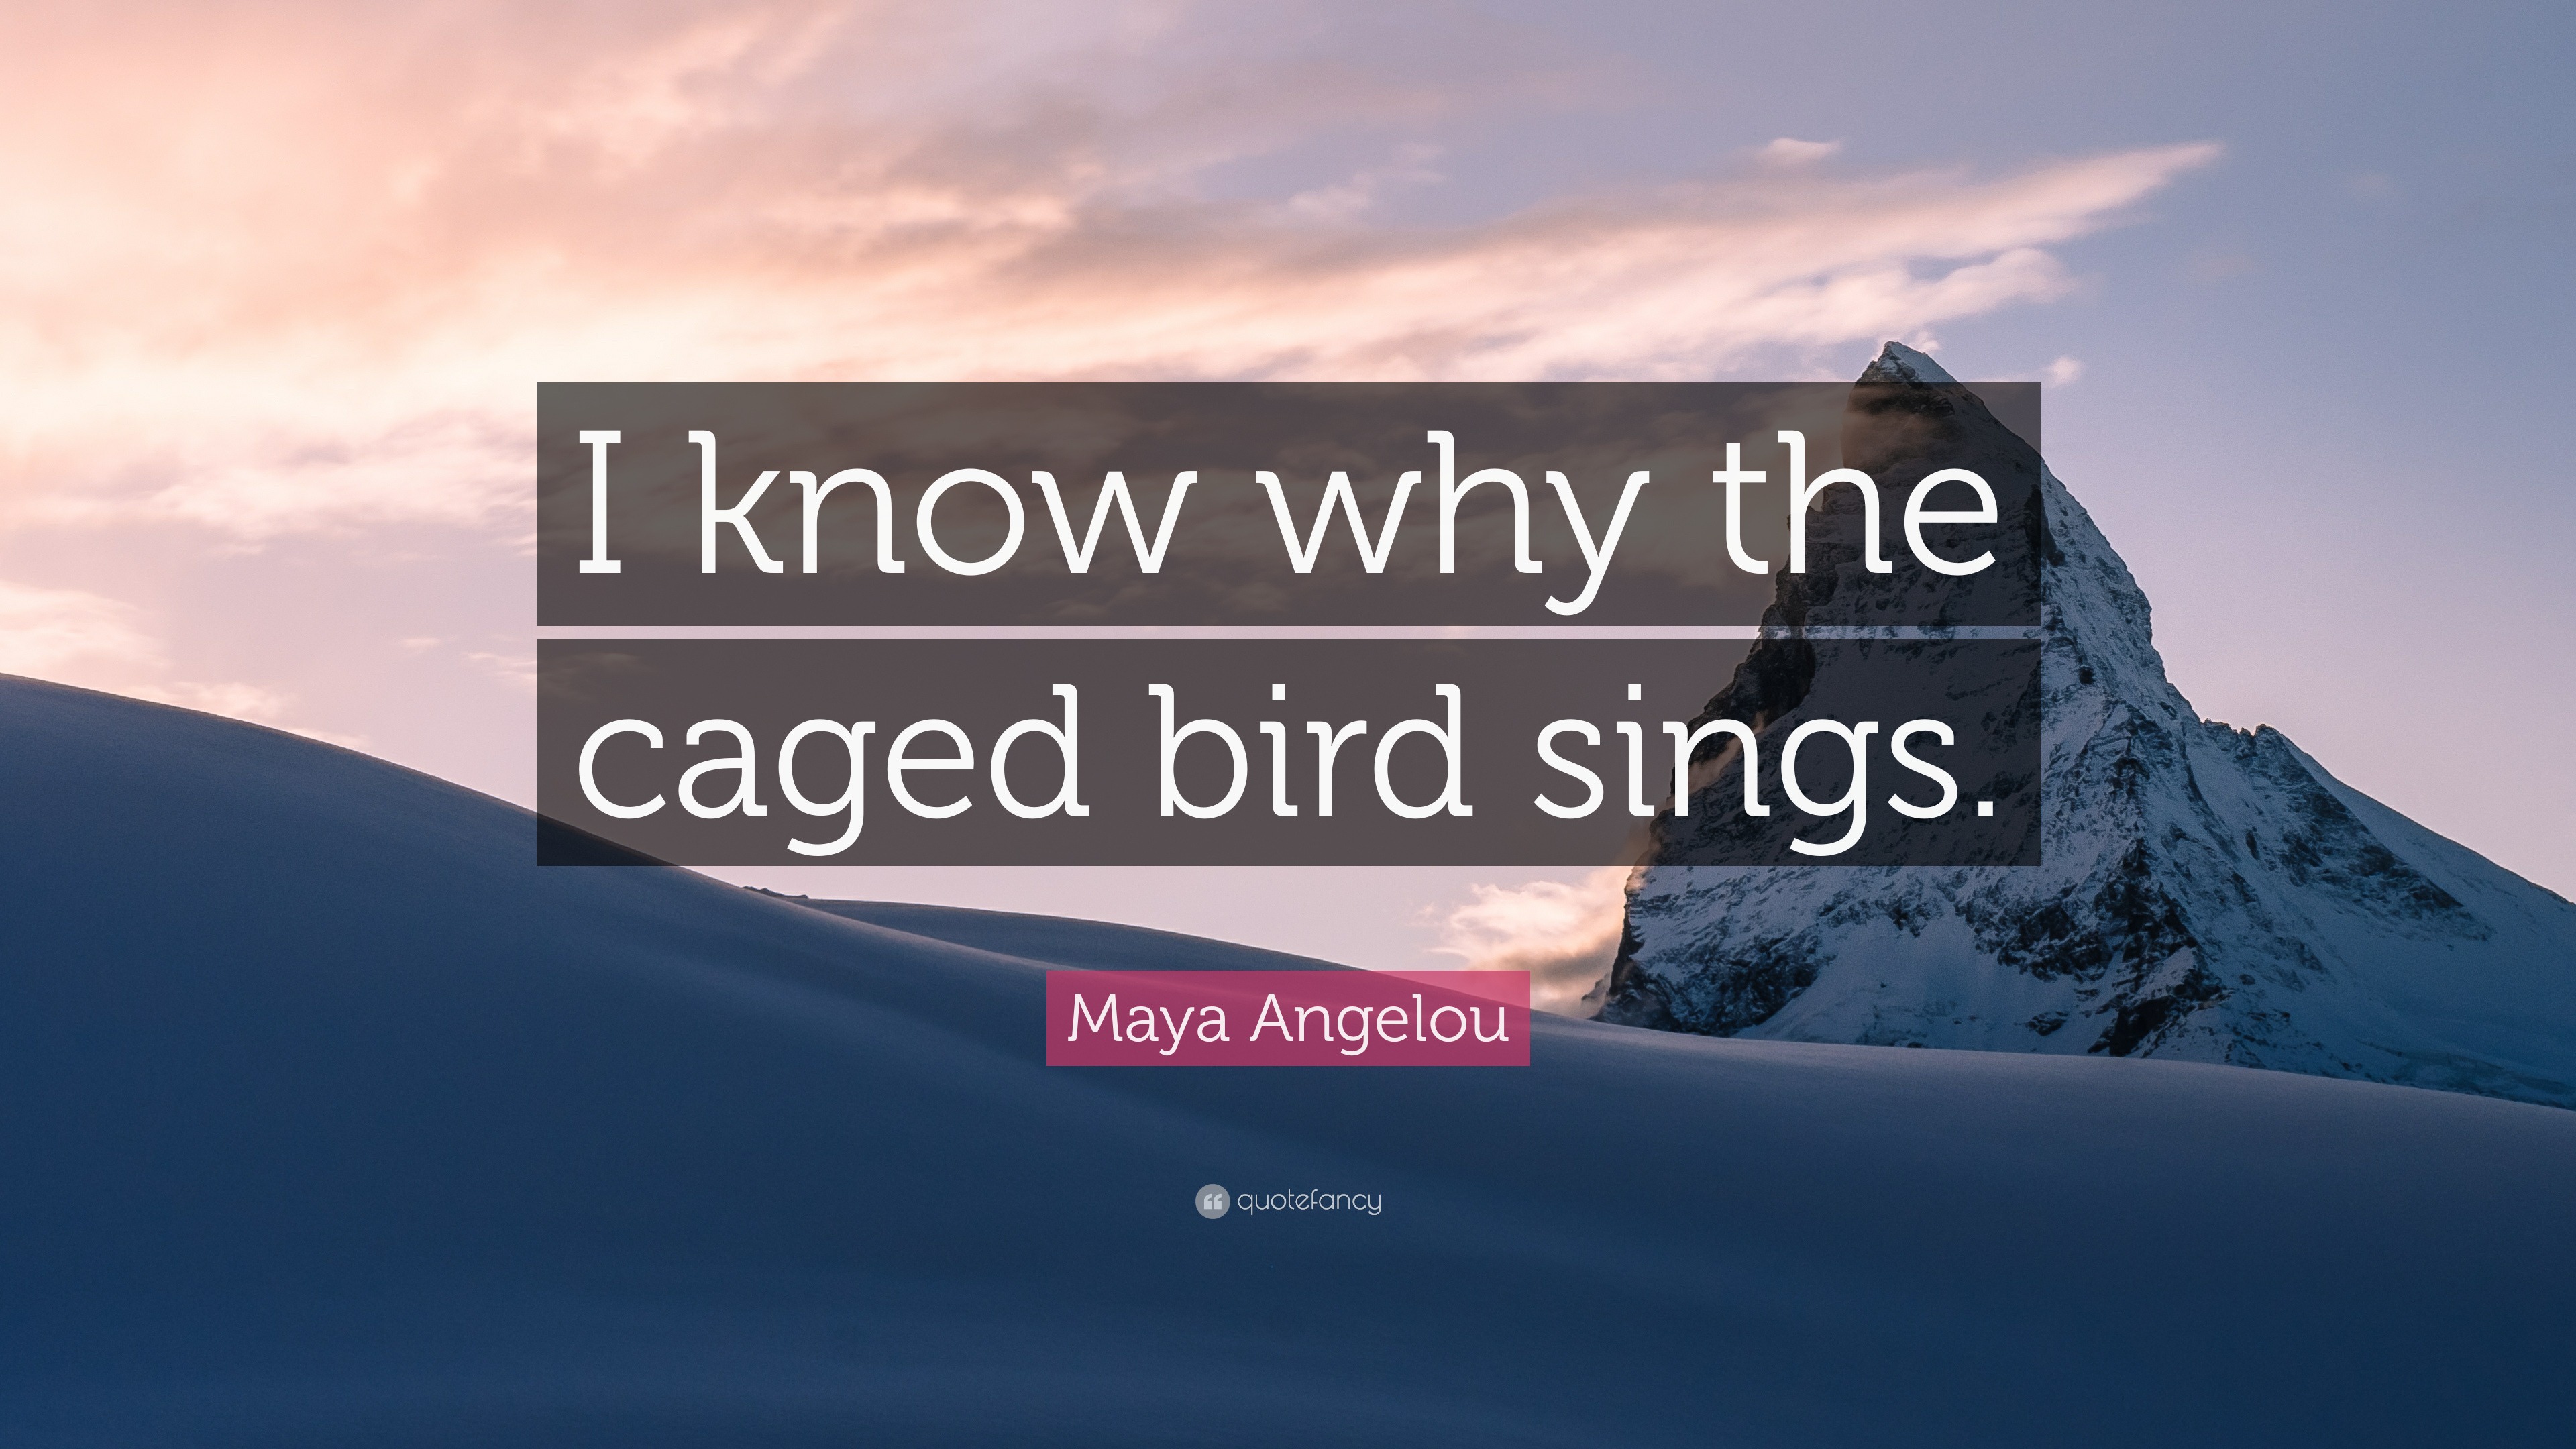 Caged maya the sings bird why i know angelou